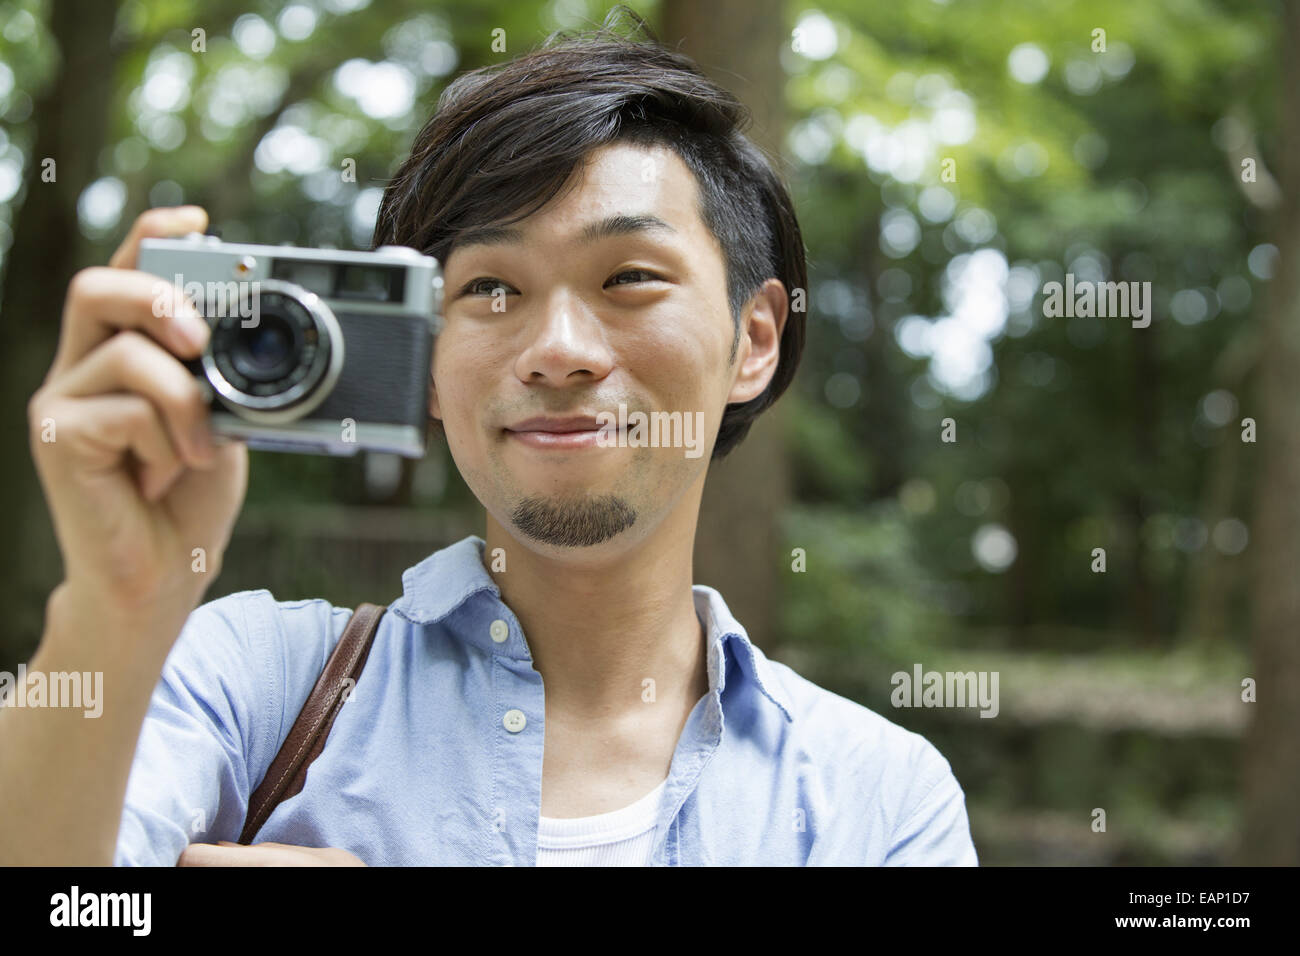 A man in a Kyoto park holding a camera, taking a picture. Stock Photo